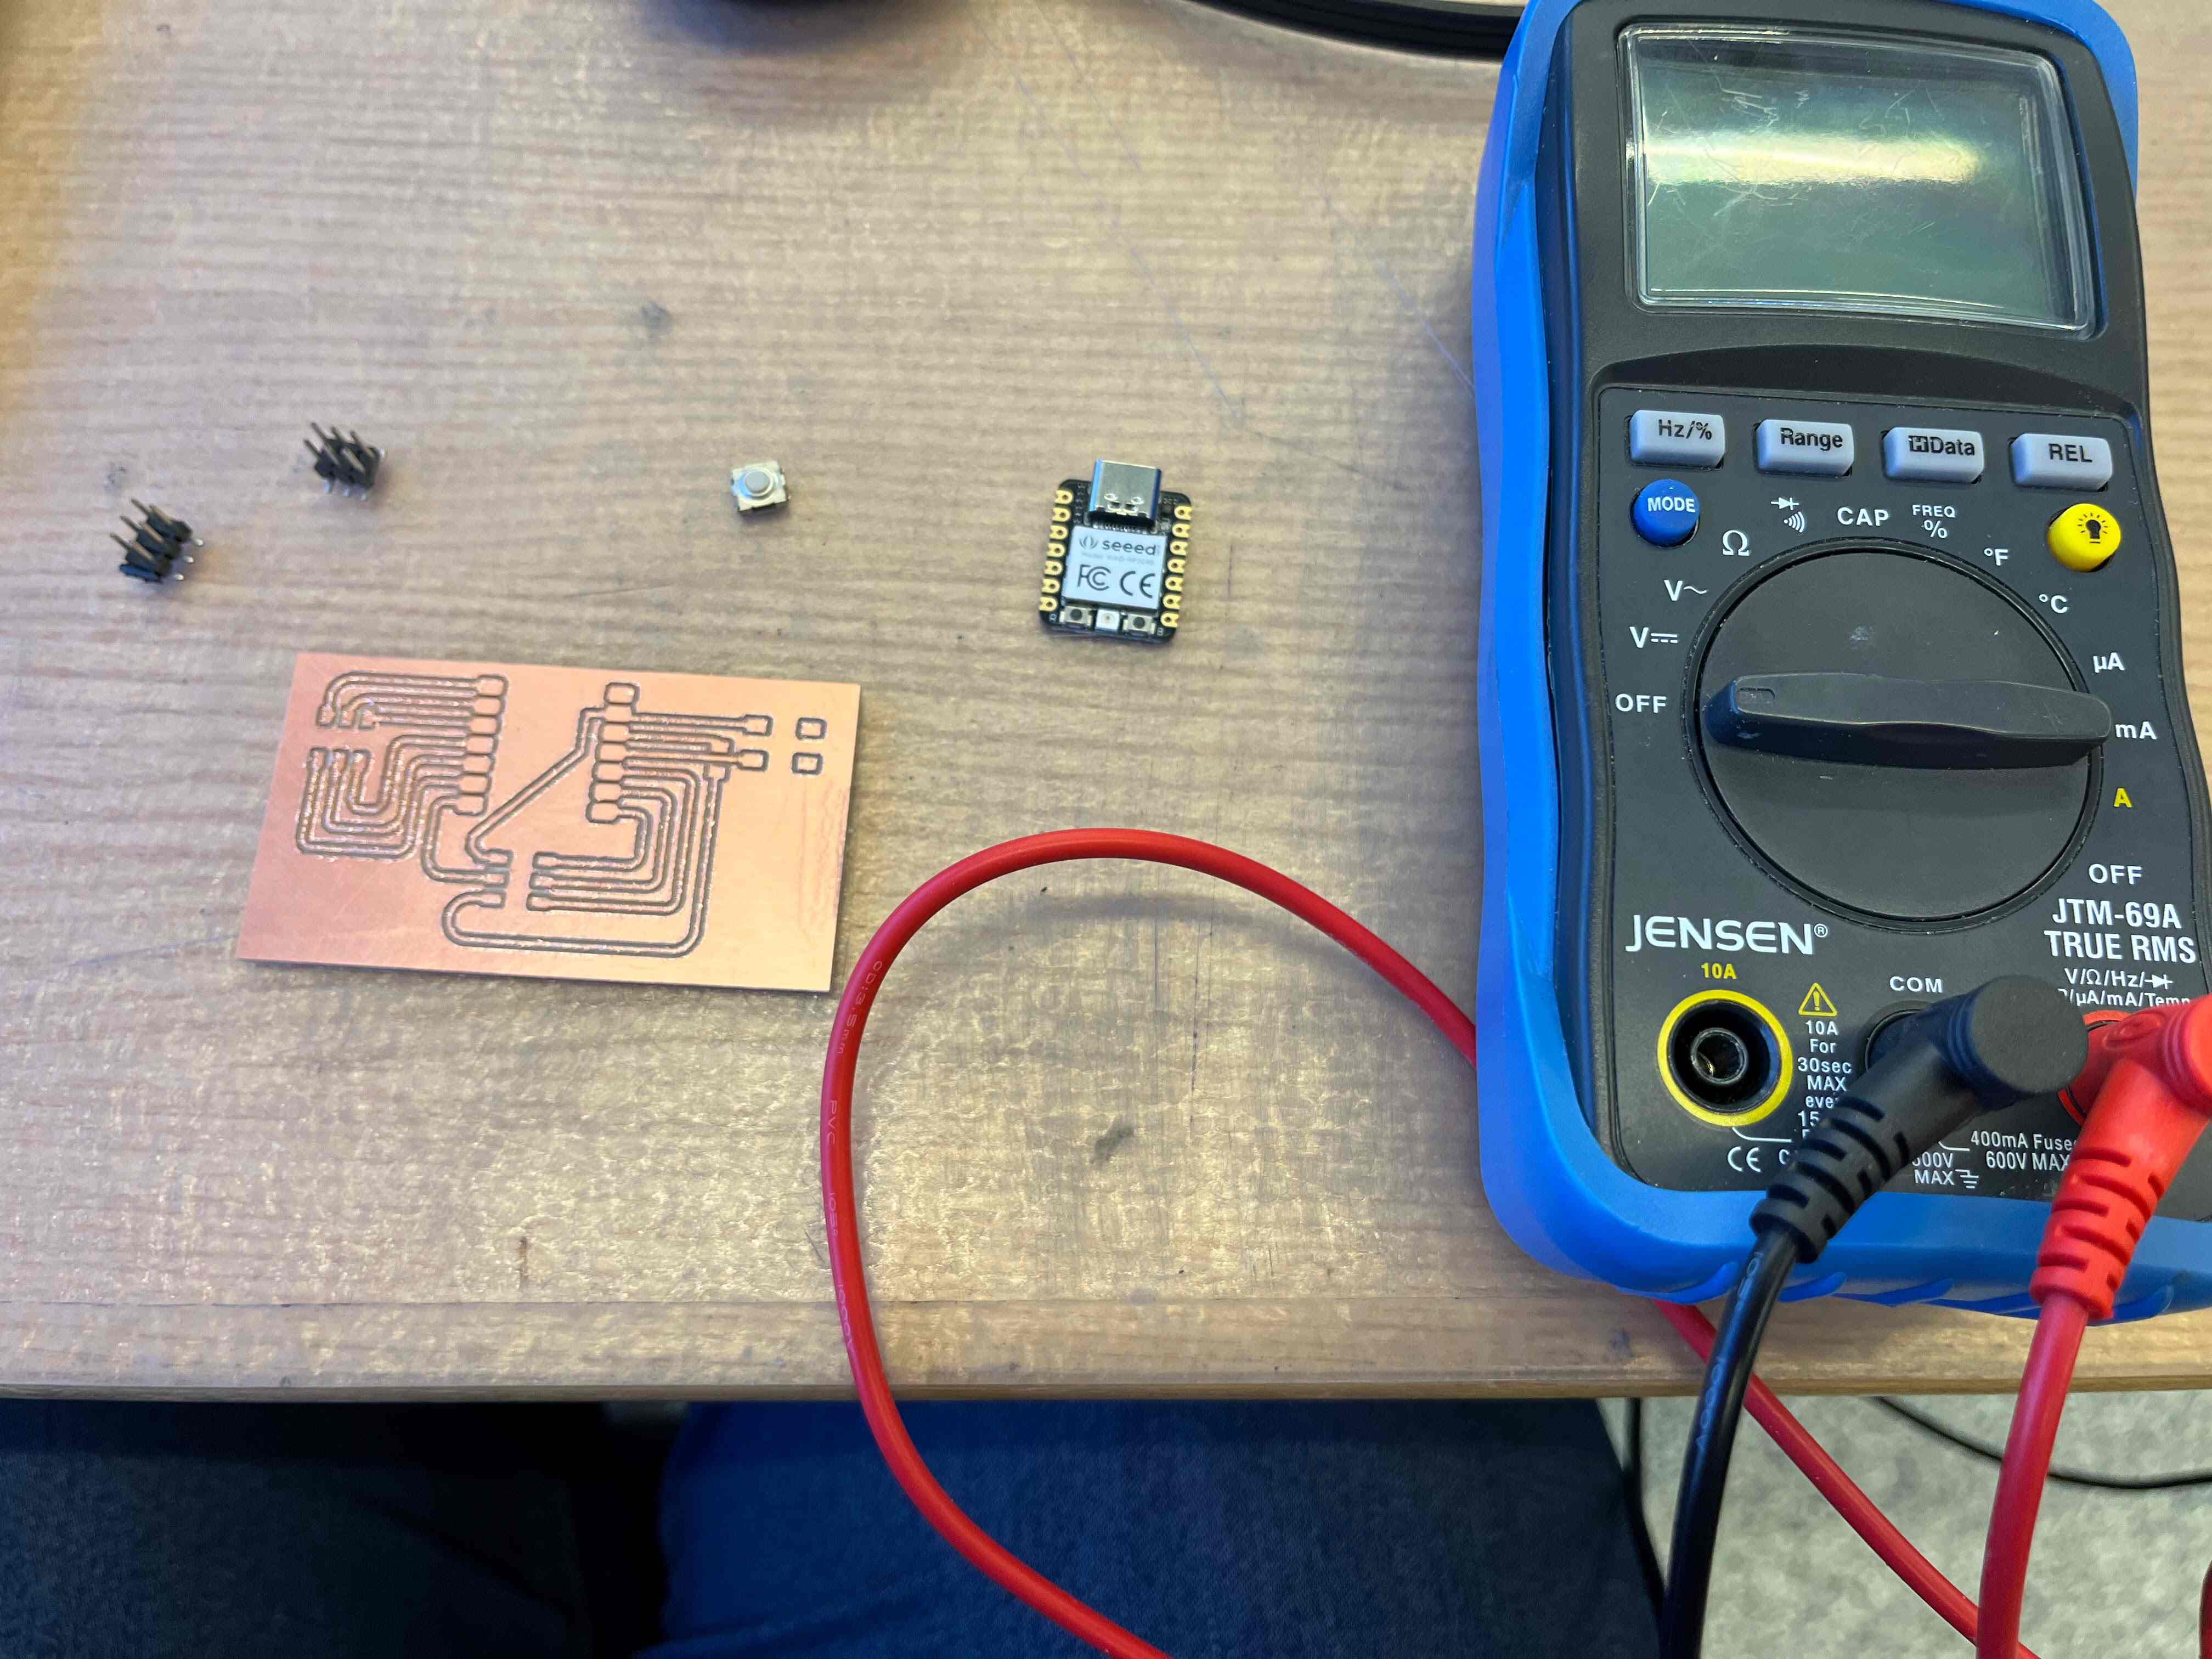 testing the connections with multimeter